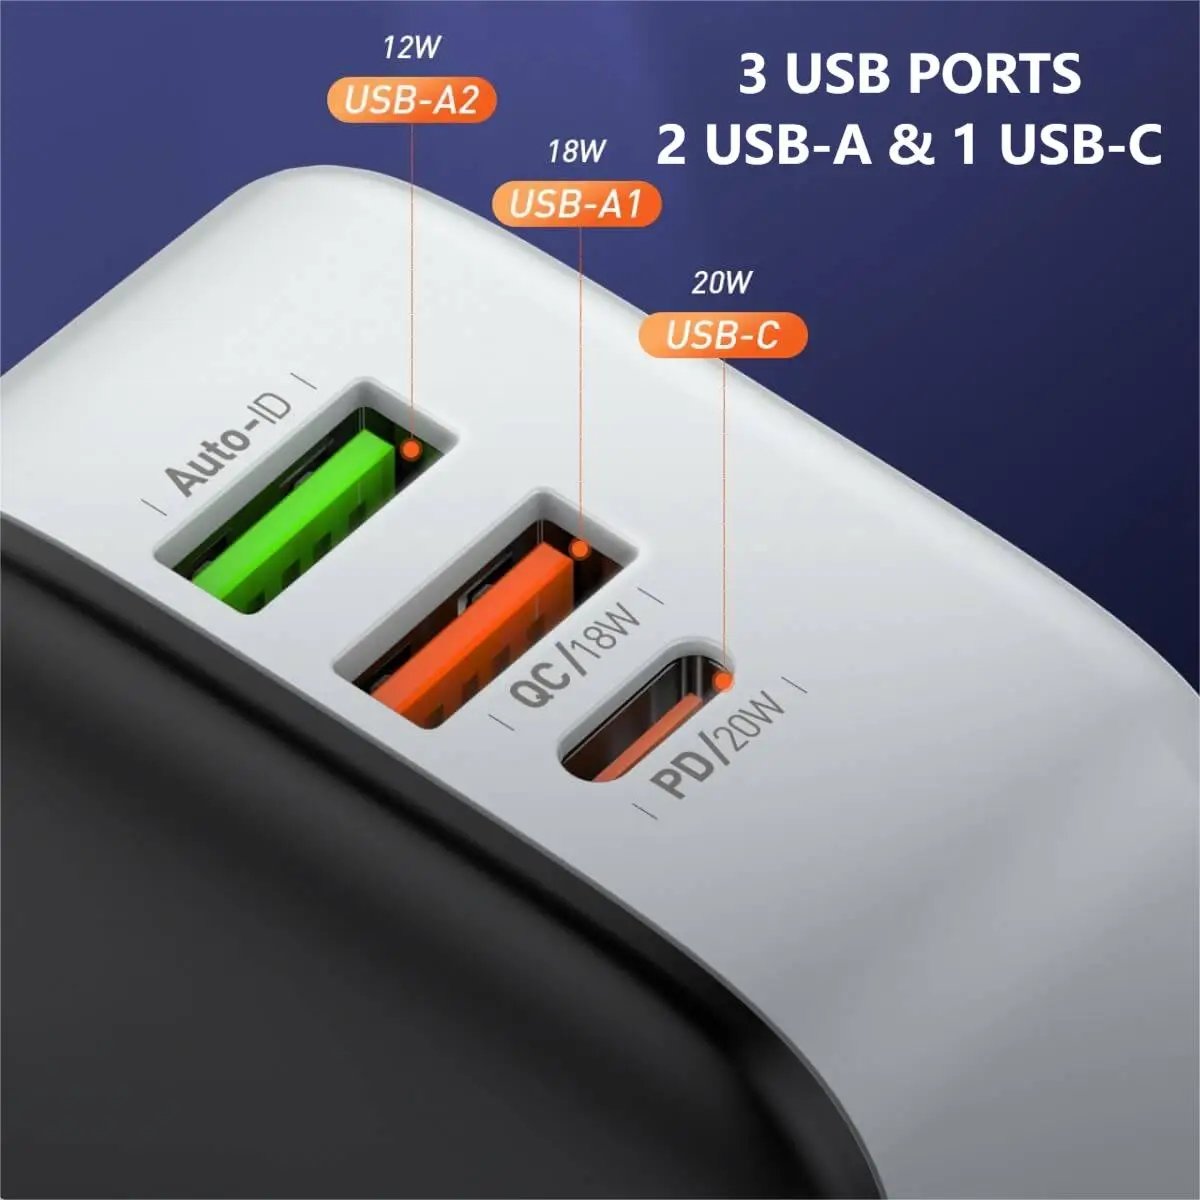 LDNIO A3513Q PD(USB-C) QC3.0 32W Fast Charger with 1M Cable - Hugmie